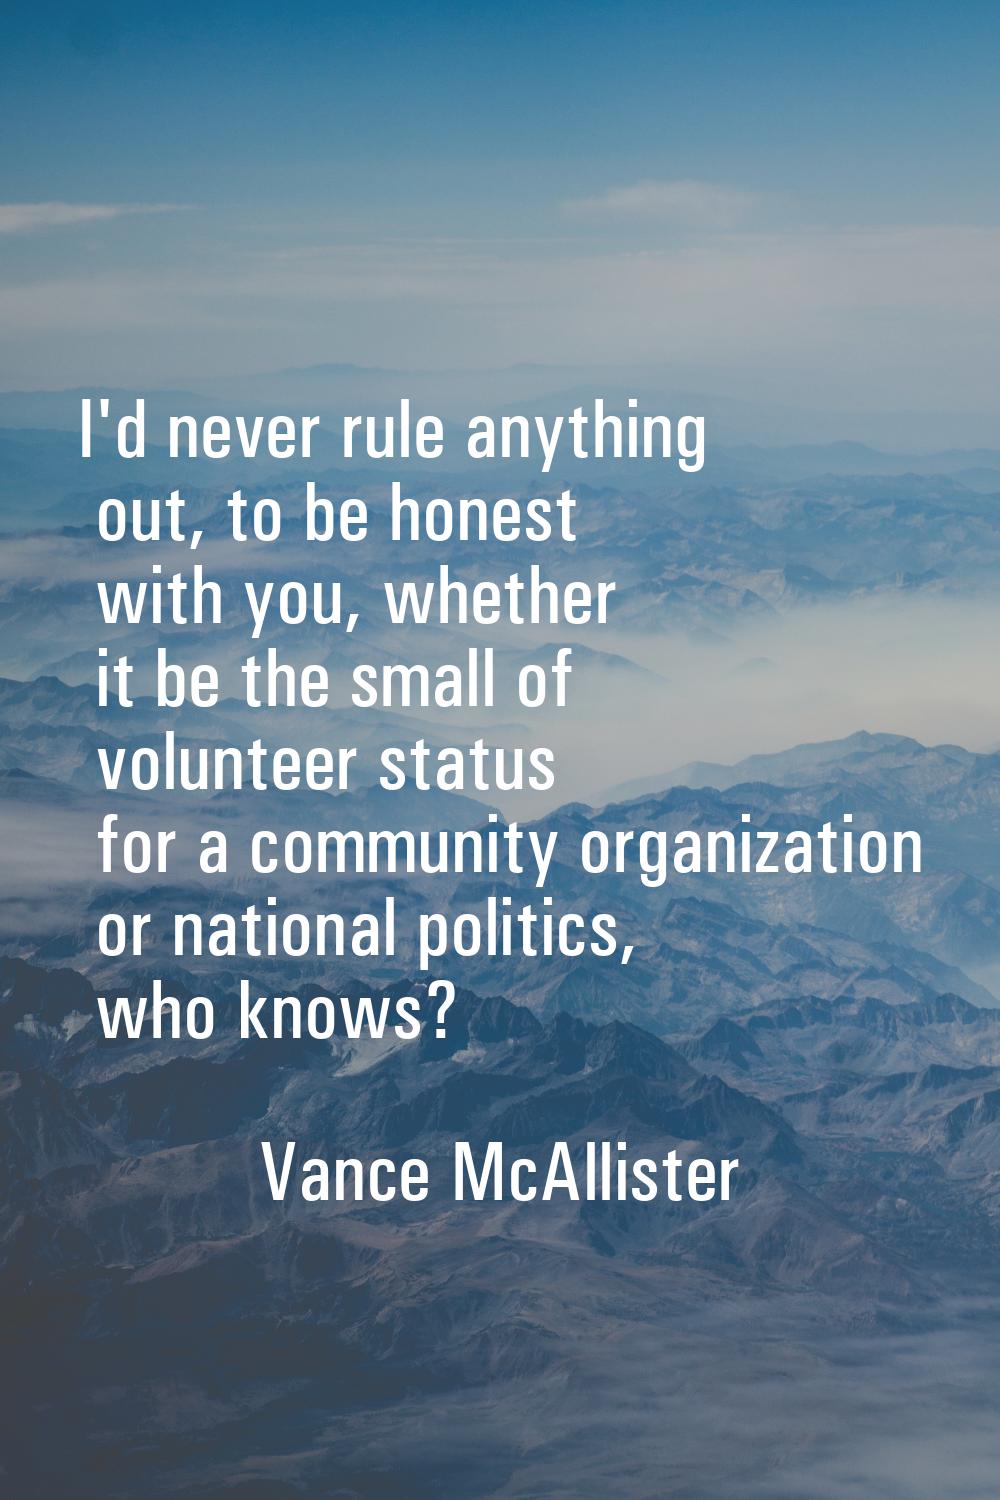 I'd never rule anything out, to be honest with you, whether it be the small of volunteer status for